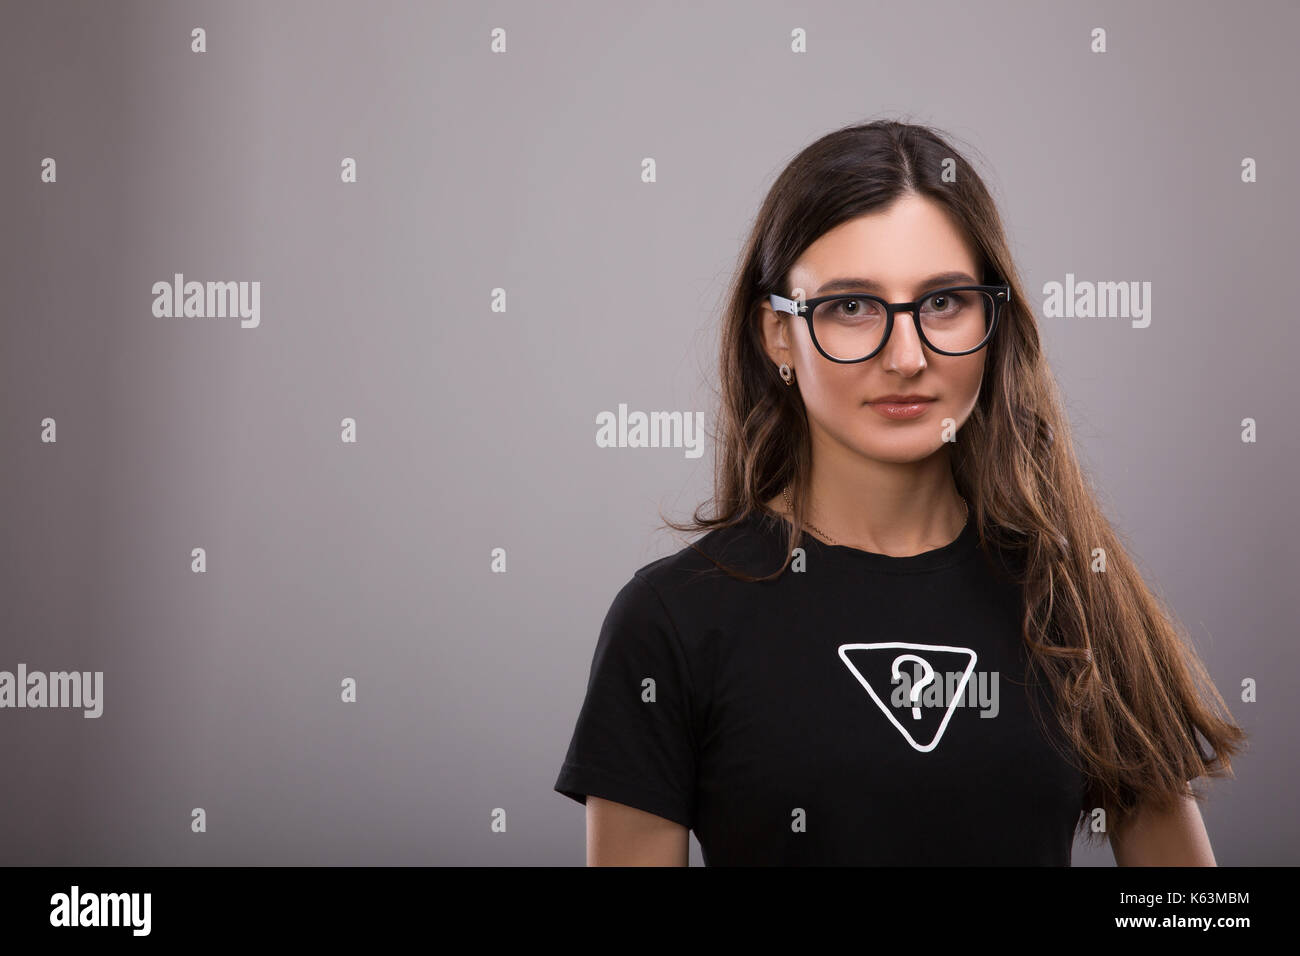 Advertising And T Shirt Design Concept Portrait Of Stylish Woman In Stock Photo Alamy,Round Designer Glasses